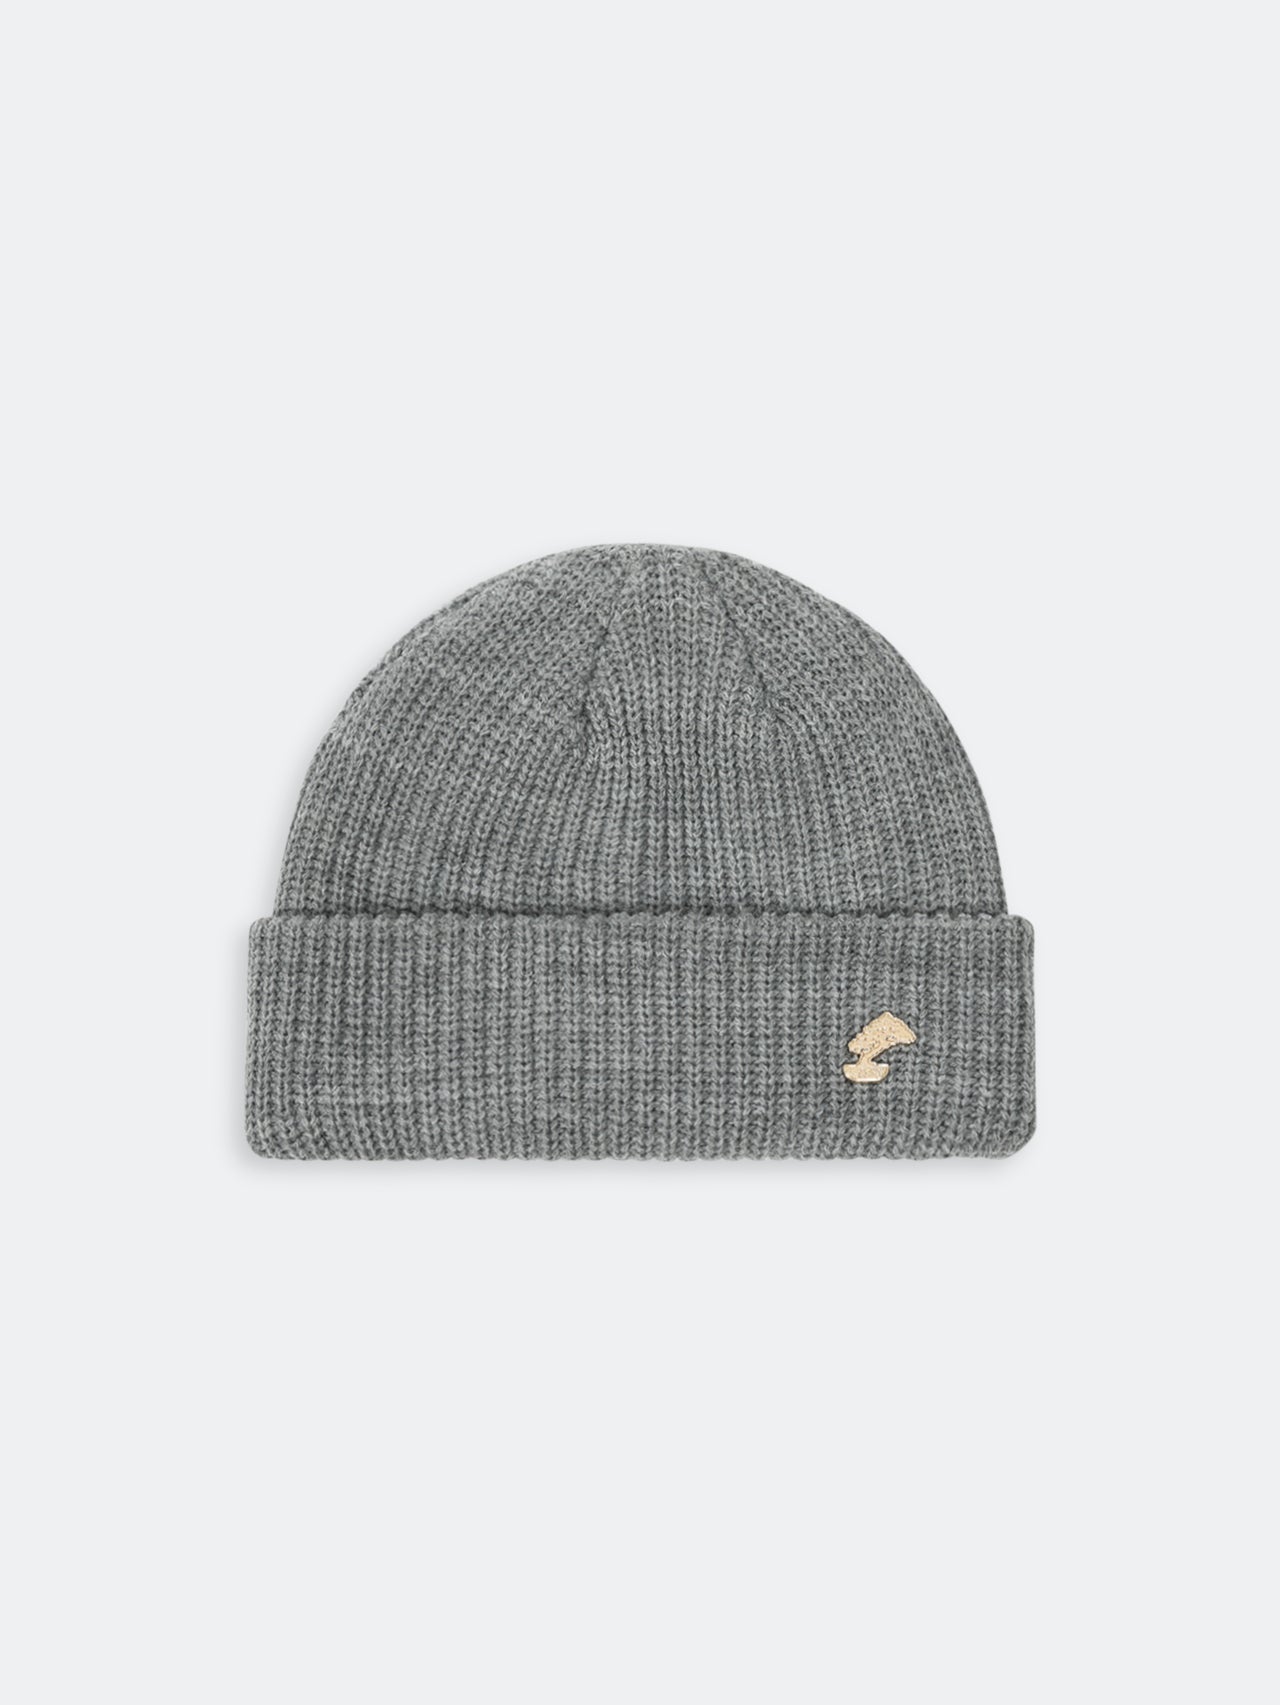 CABLE KNIT BEANIE - GREY